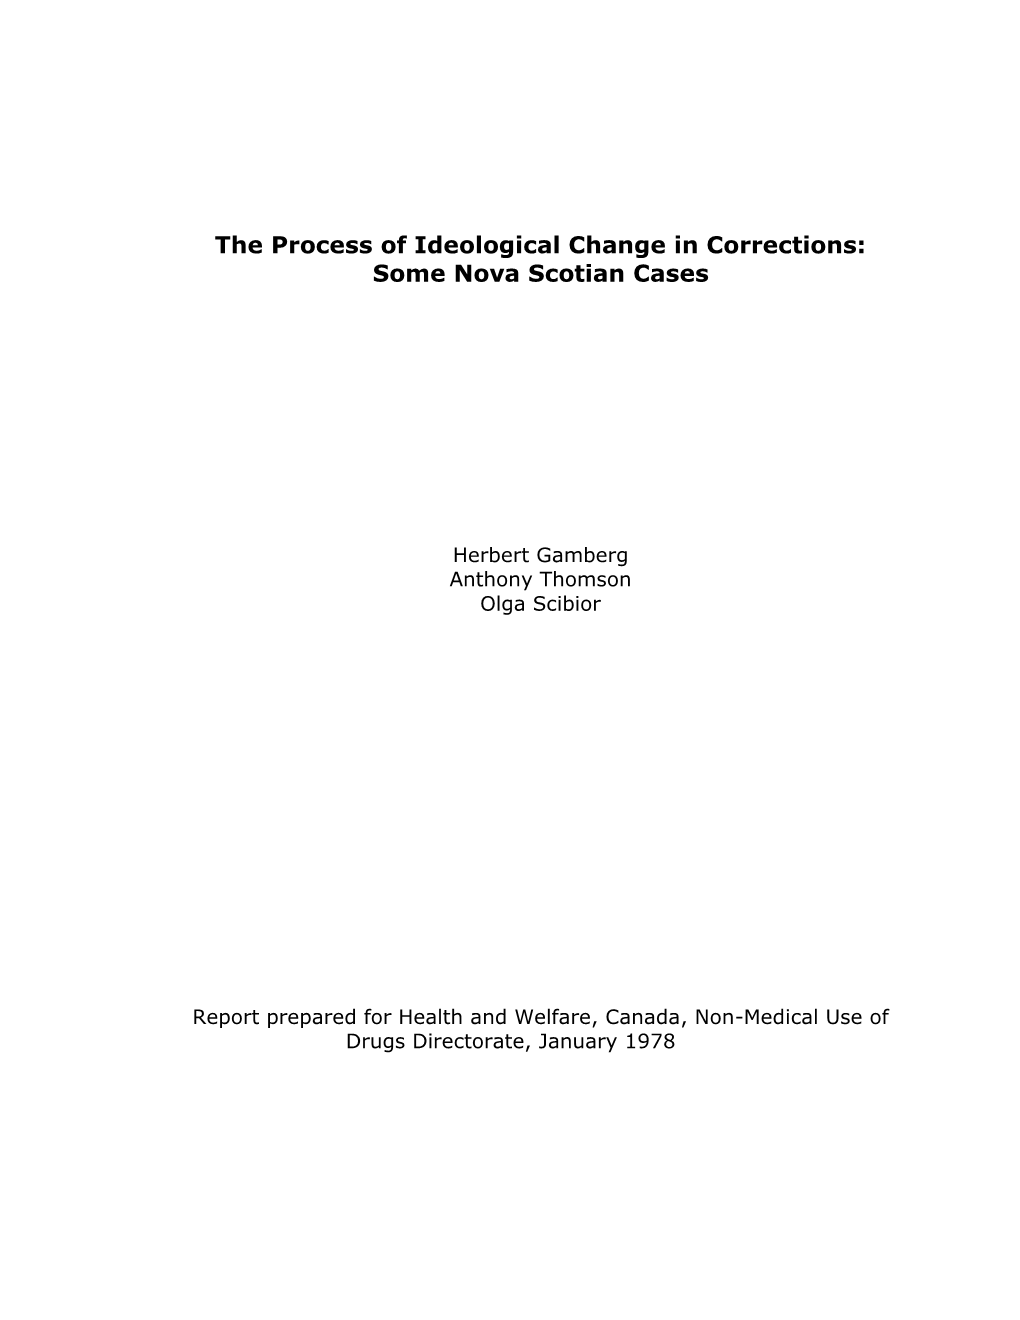 The Process of Ideological Change in Corrections: Some Nova Scotian Cases